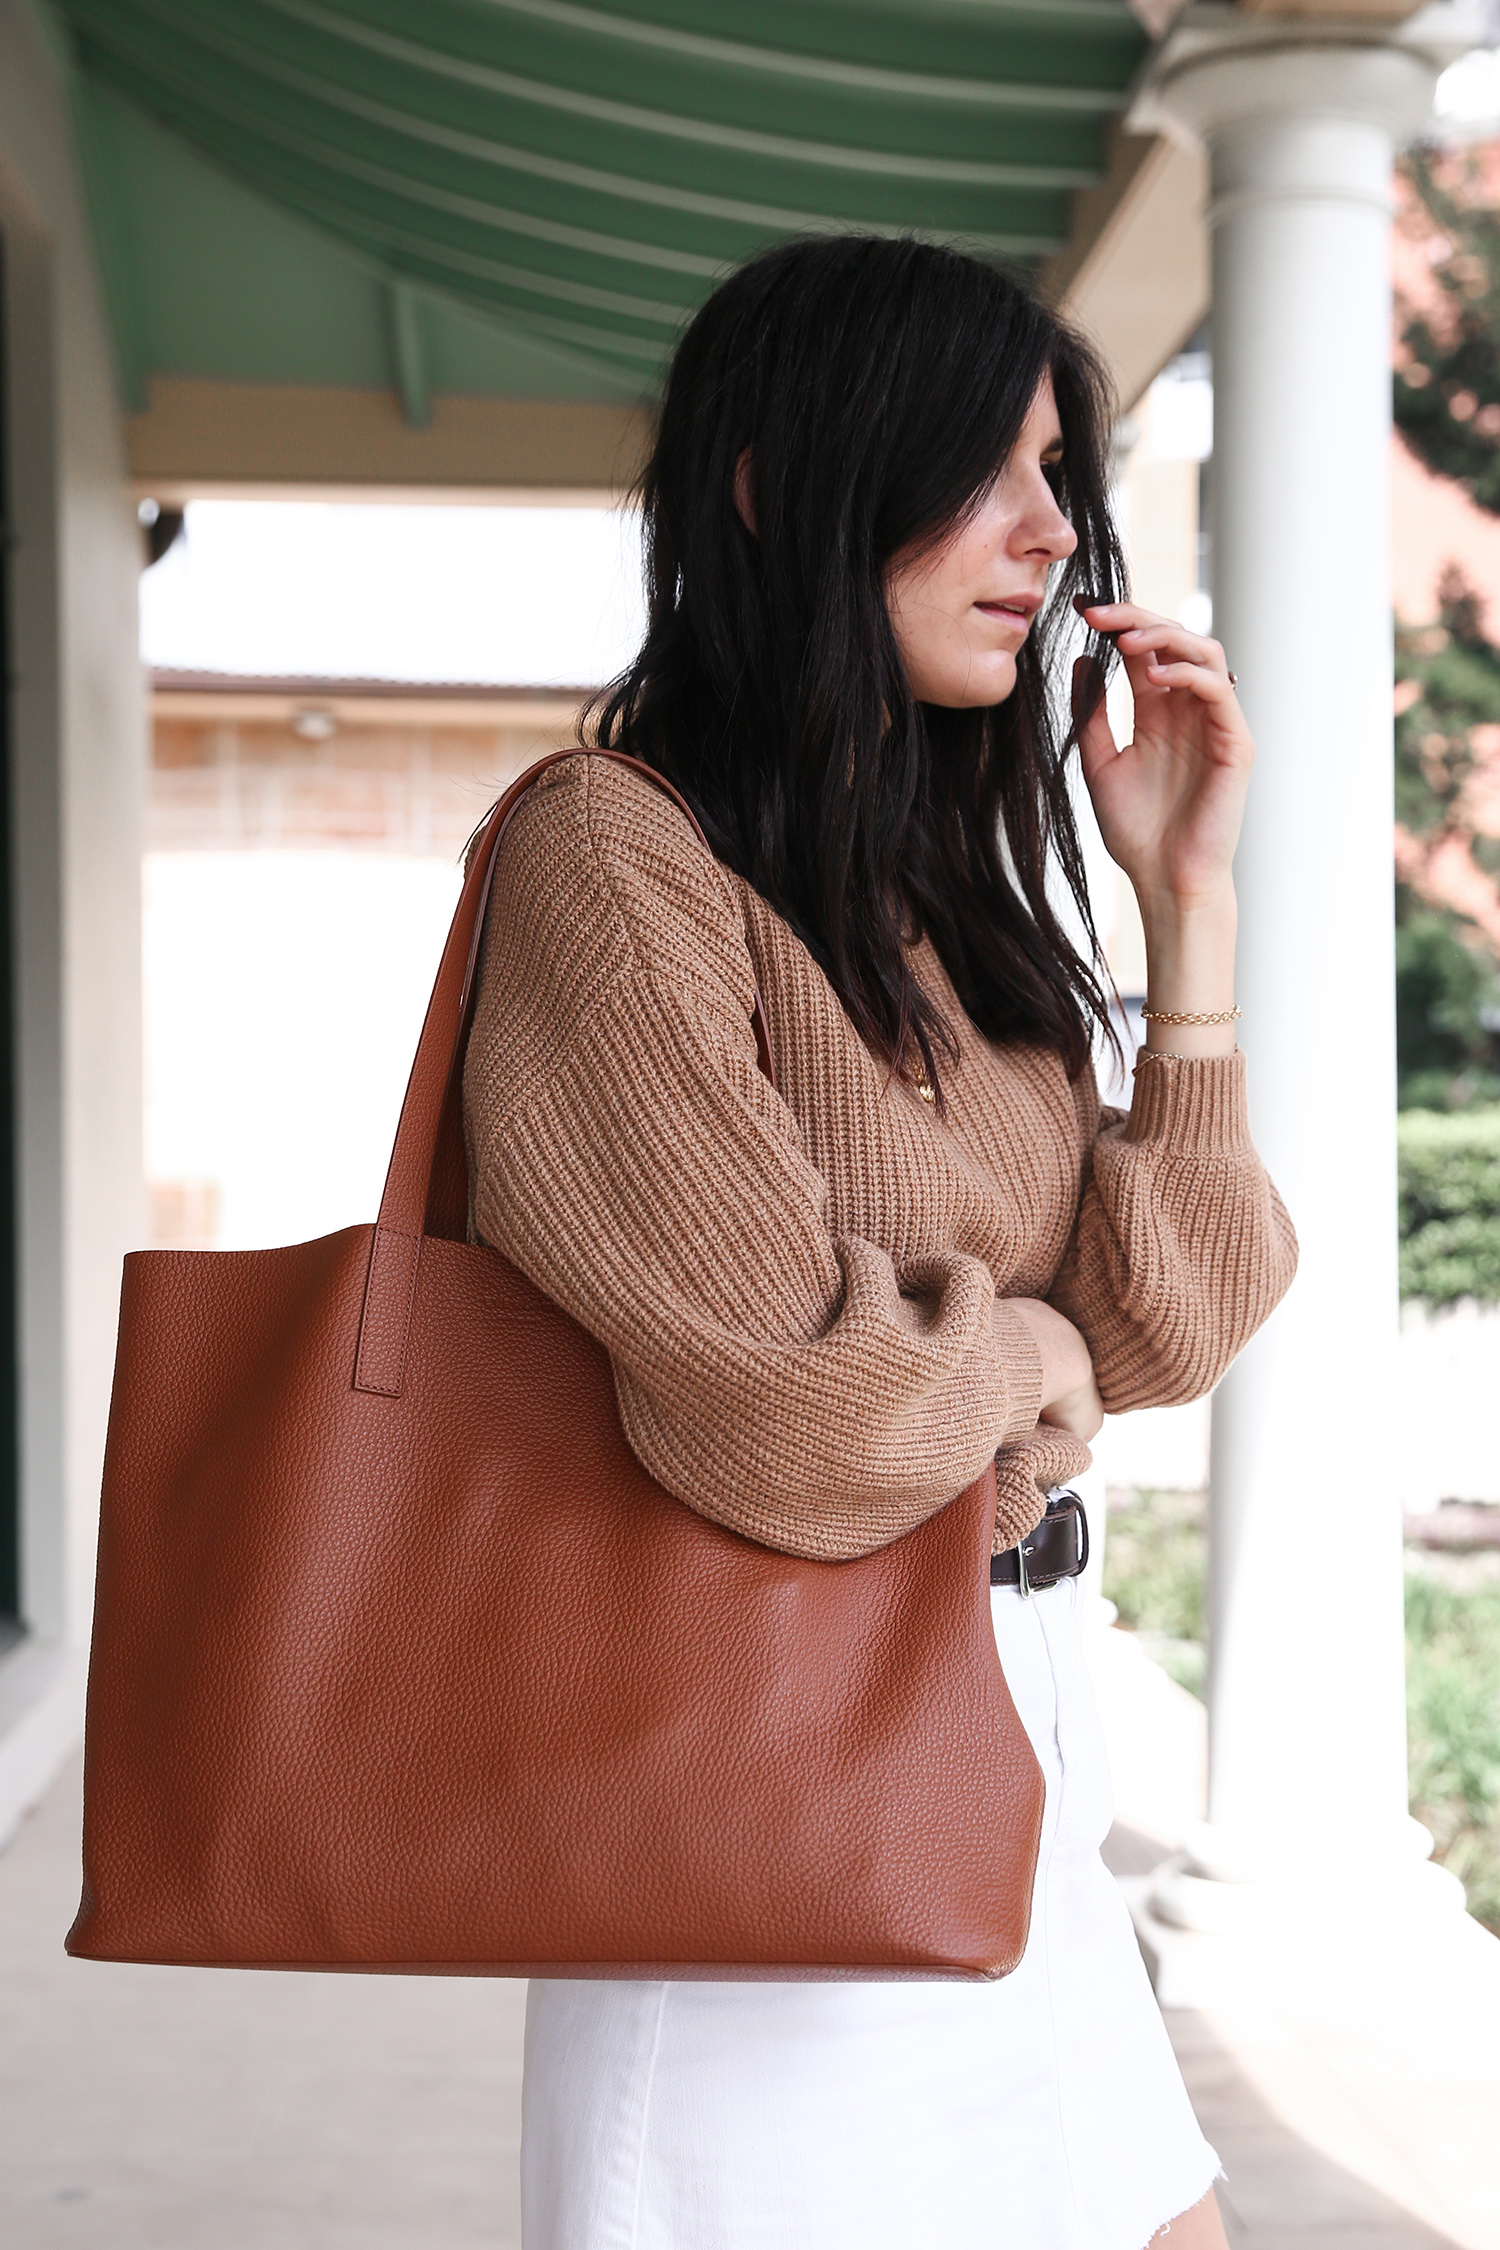 Everlane Soft Day Tote Review - Mademoiselle | Minimal Style Blog